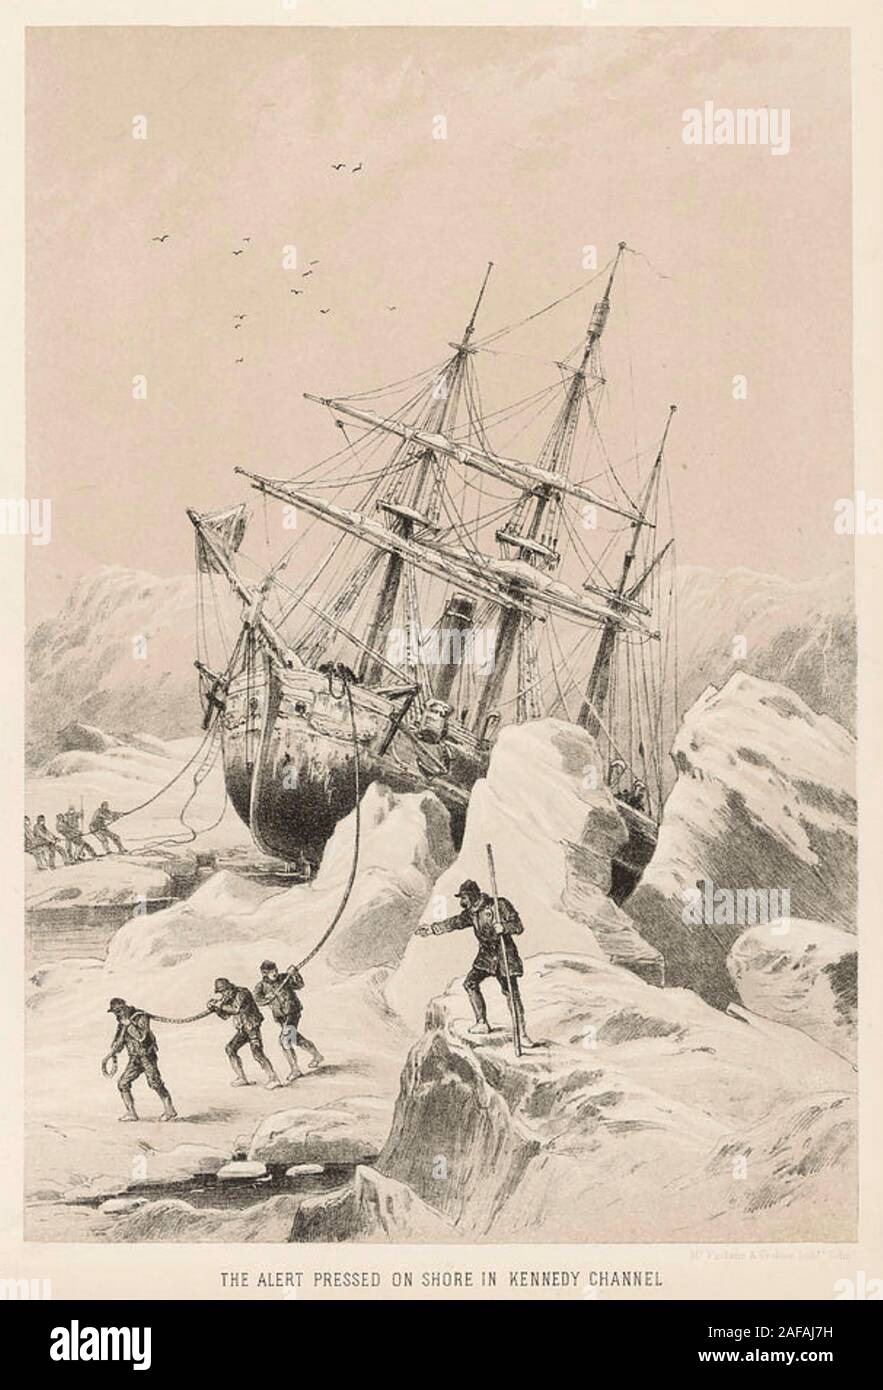 BRITISH ARCTIC EXPEDITION 1875-1876 led by George Nares showing HMS Alert trapped in pack ice Stock Photo